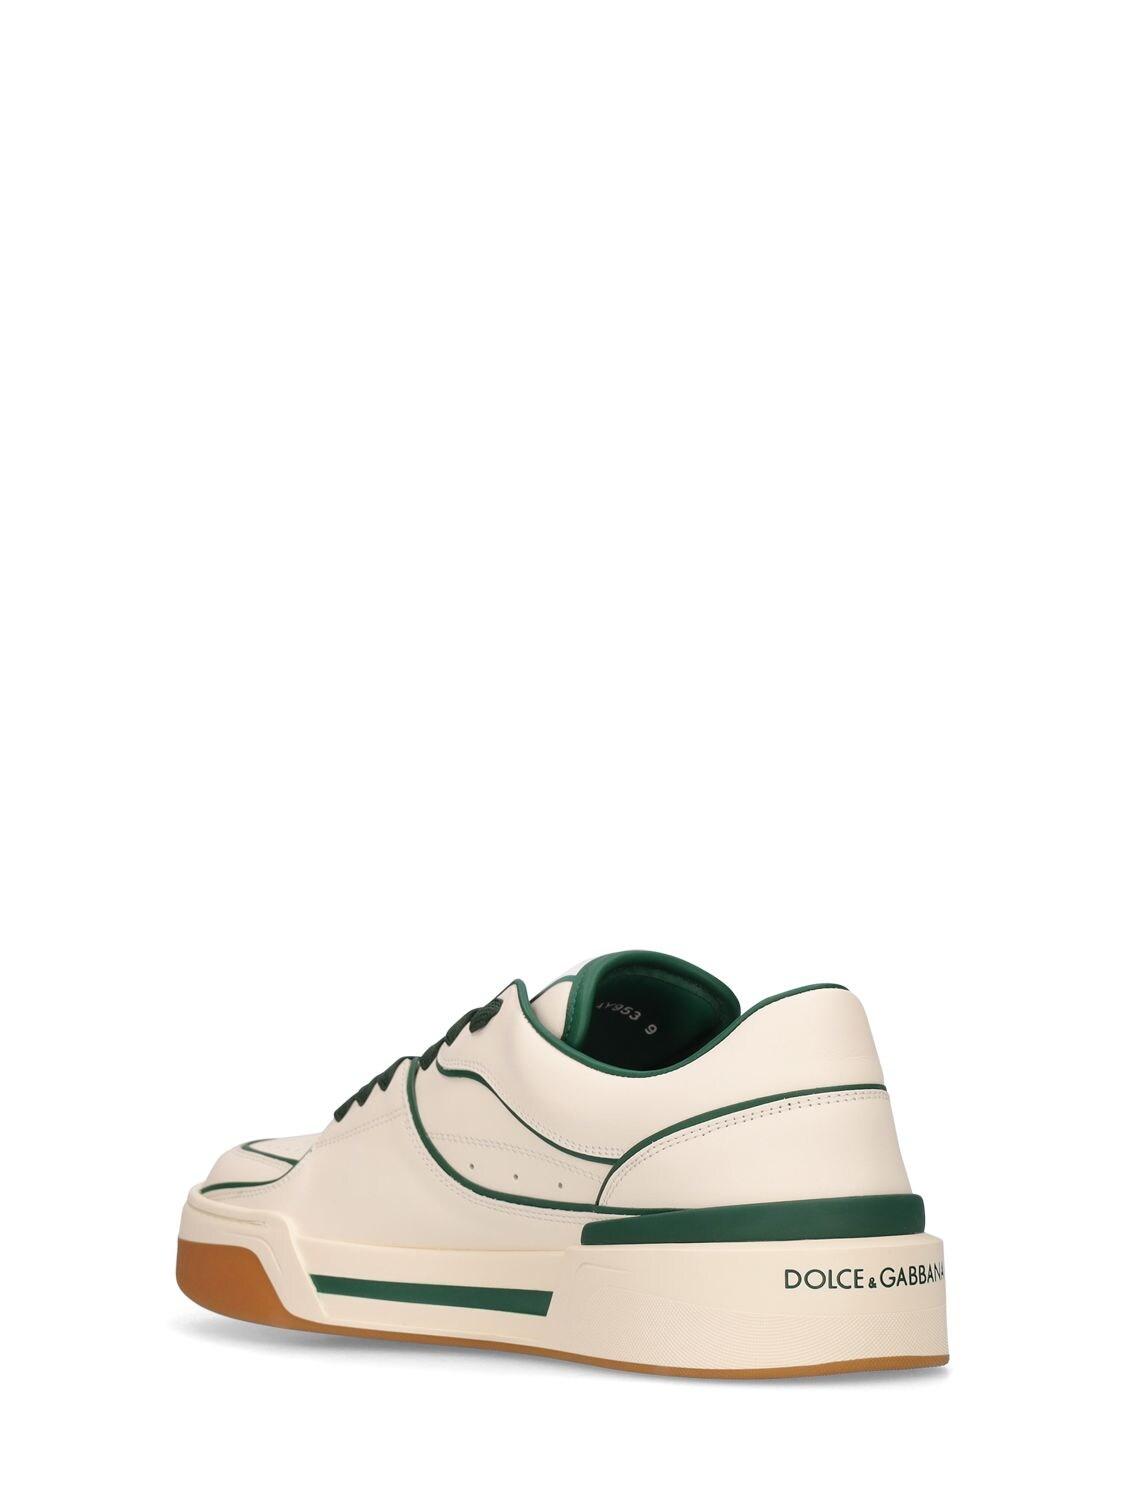 for Men Natural Save 9% Dolce & Gabbana new Roma Leather Sneakers in Beige,Green Mens Trainers Dolce & Gabbana Trainers 